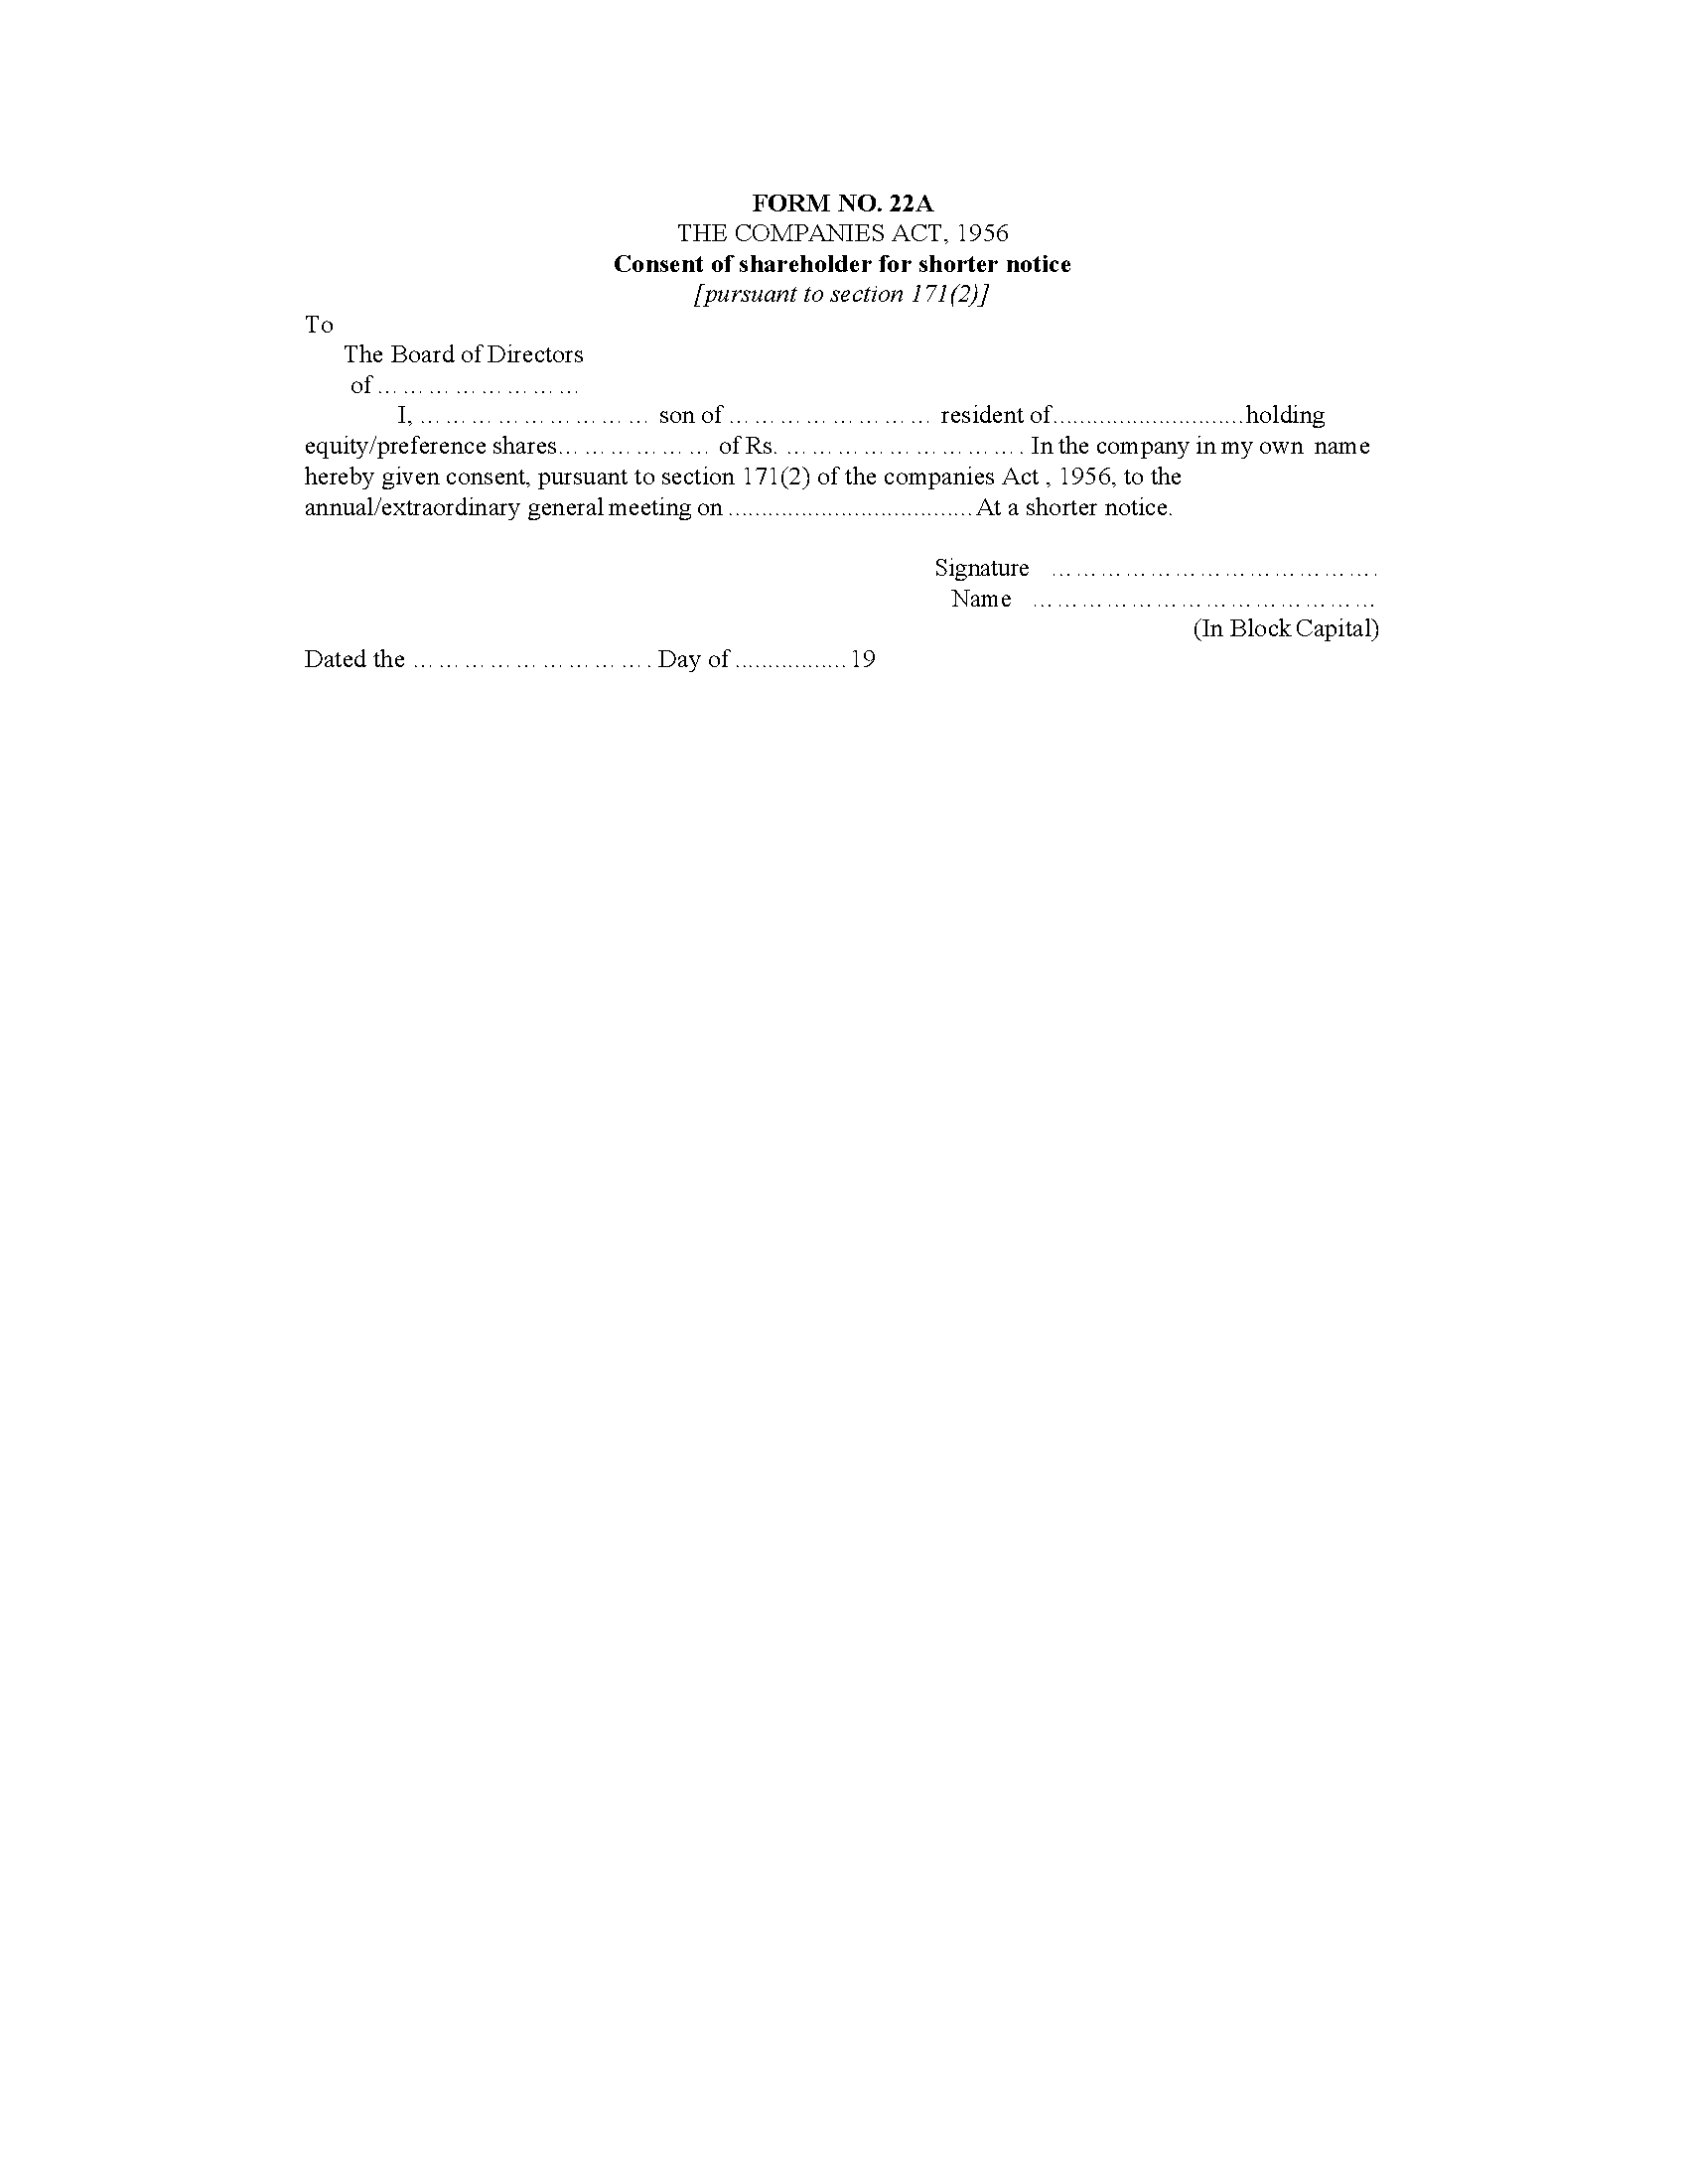 31 - FORM NO. 22A Consent of shareholder for shorter notice-converted